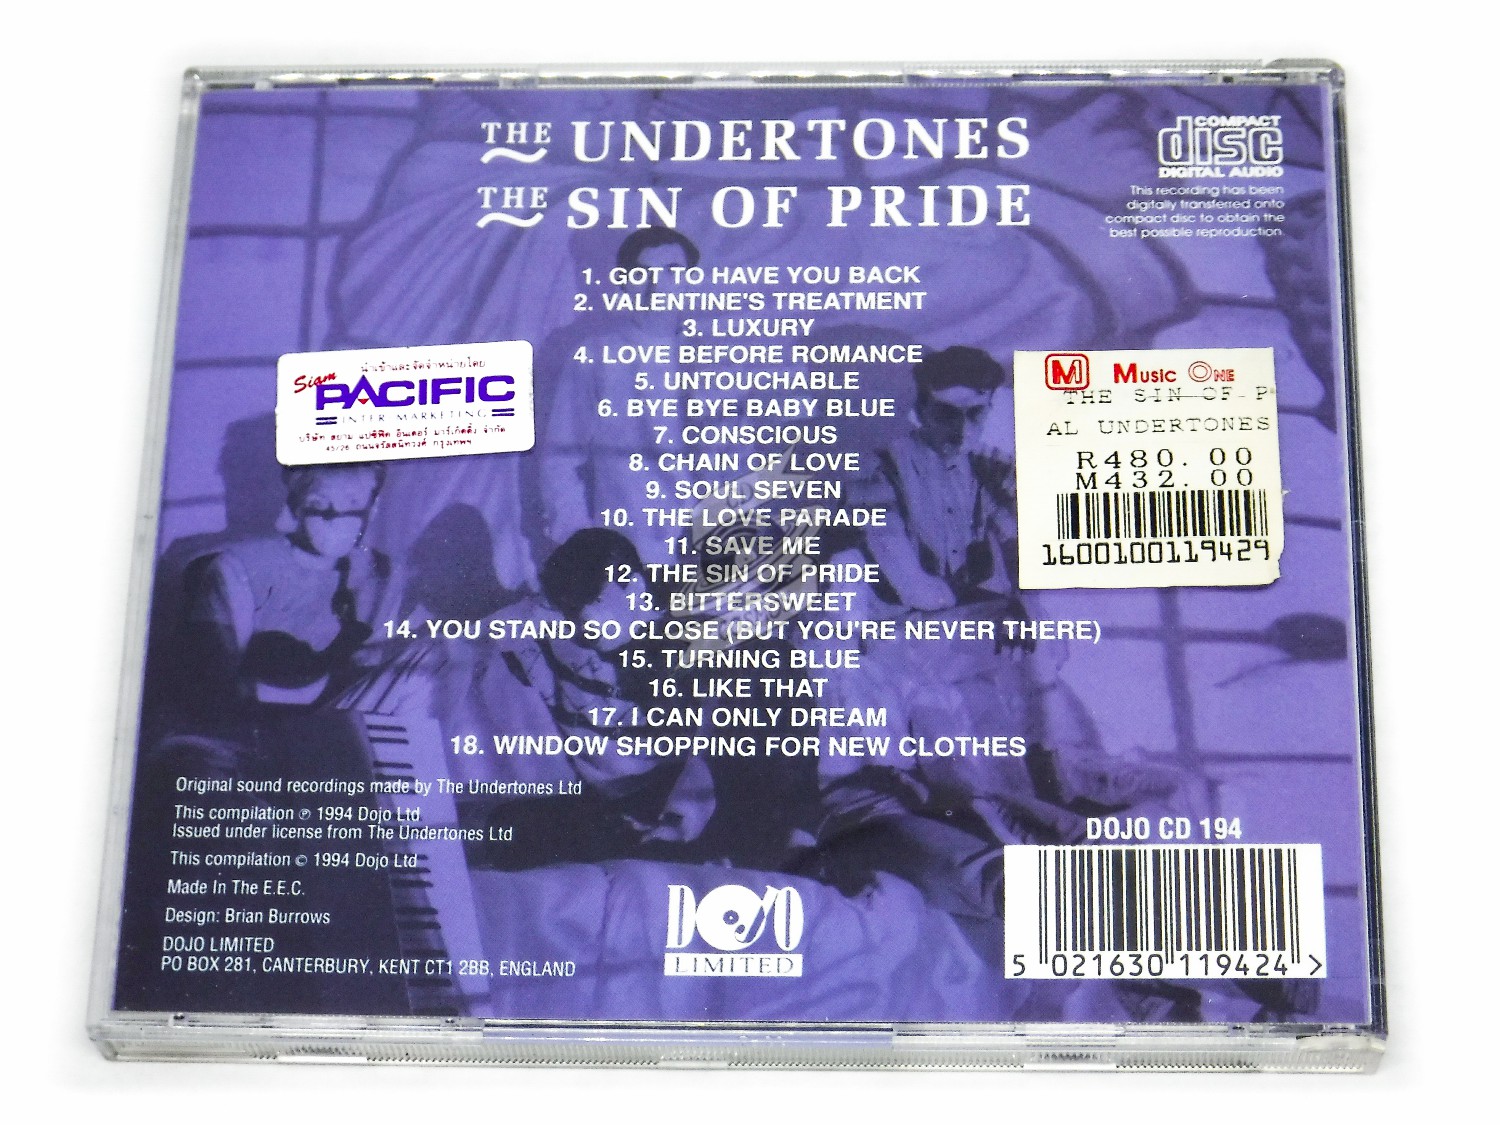 THE UNDERTONES 'GOT TO HAVE YOU BACK' | ochge.org